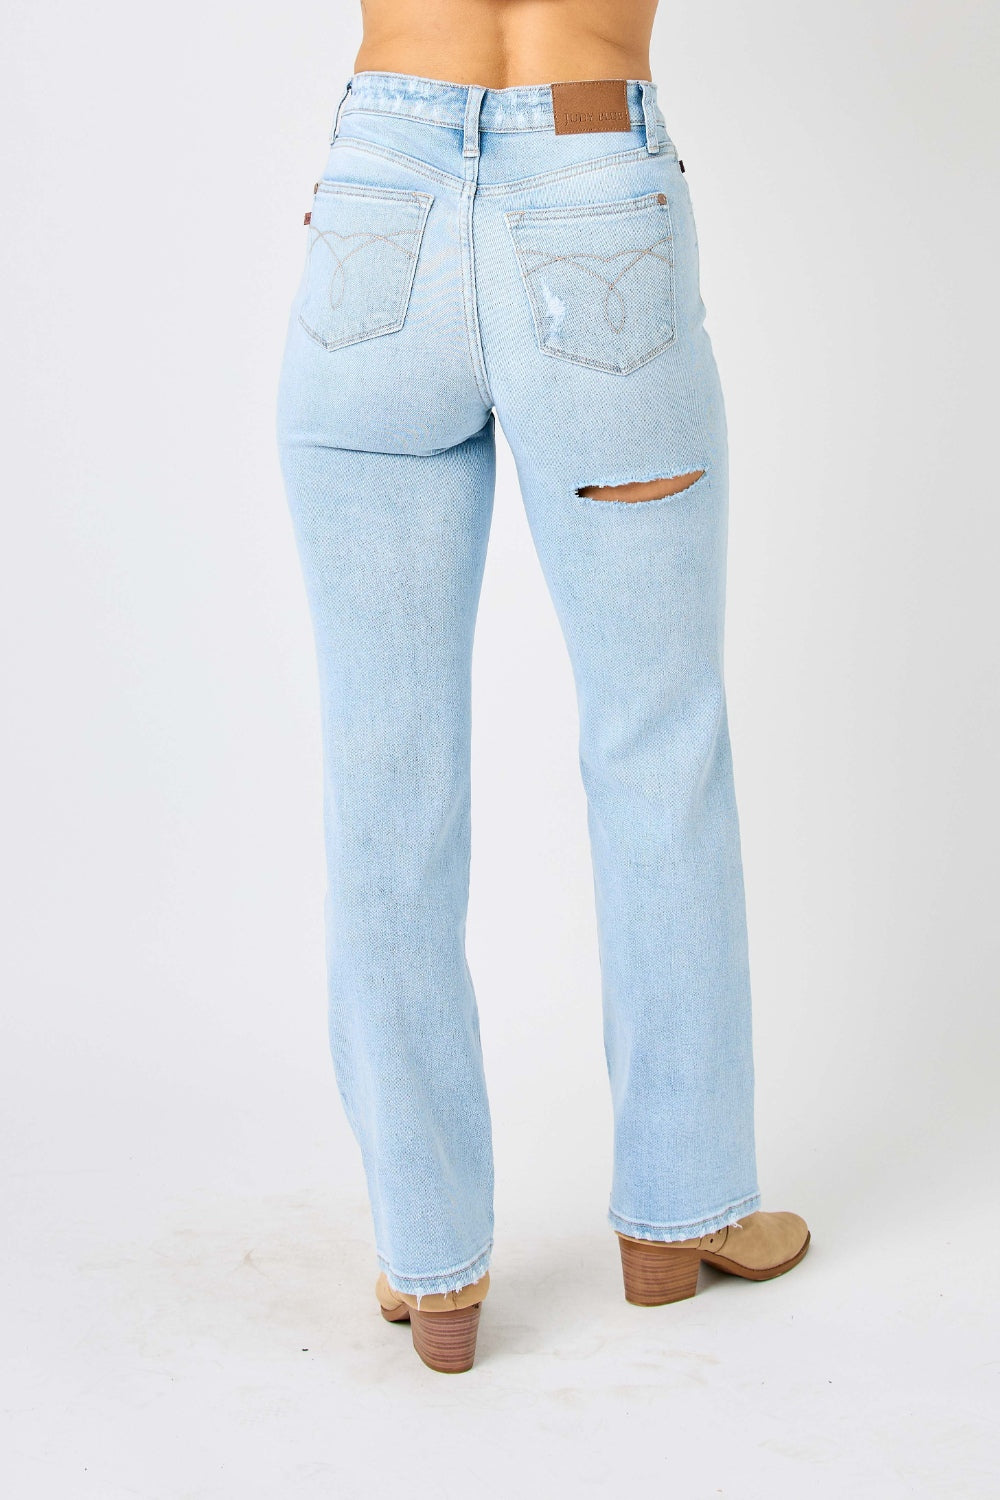 Judy Blue Distressed High Waist Straight Jeans Pants RYSE Clothing Co.   